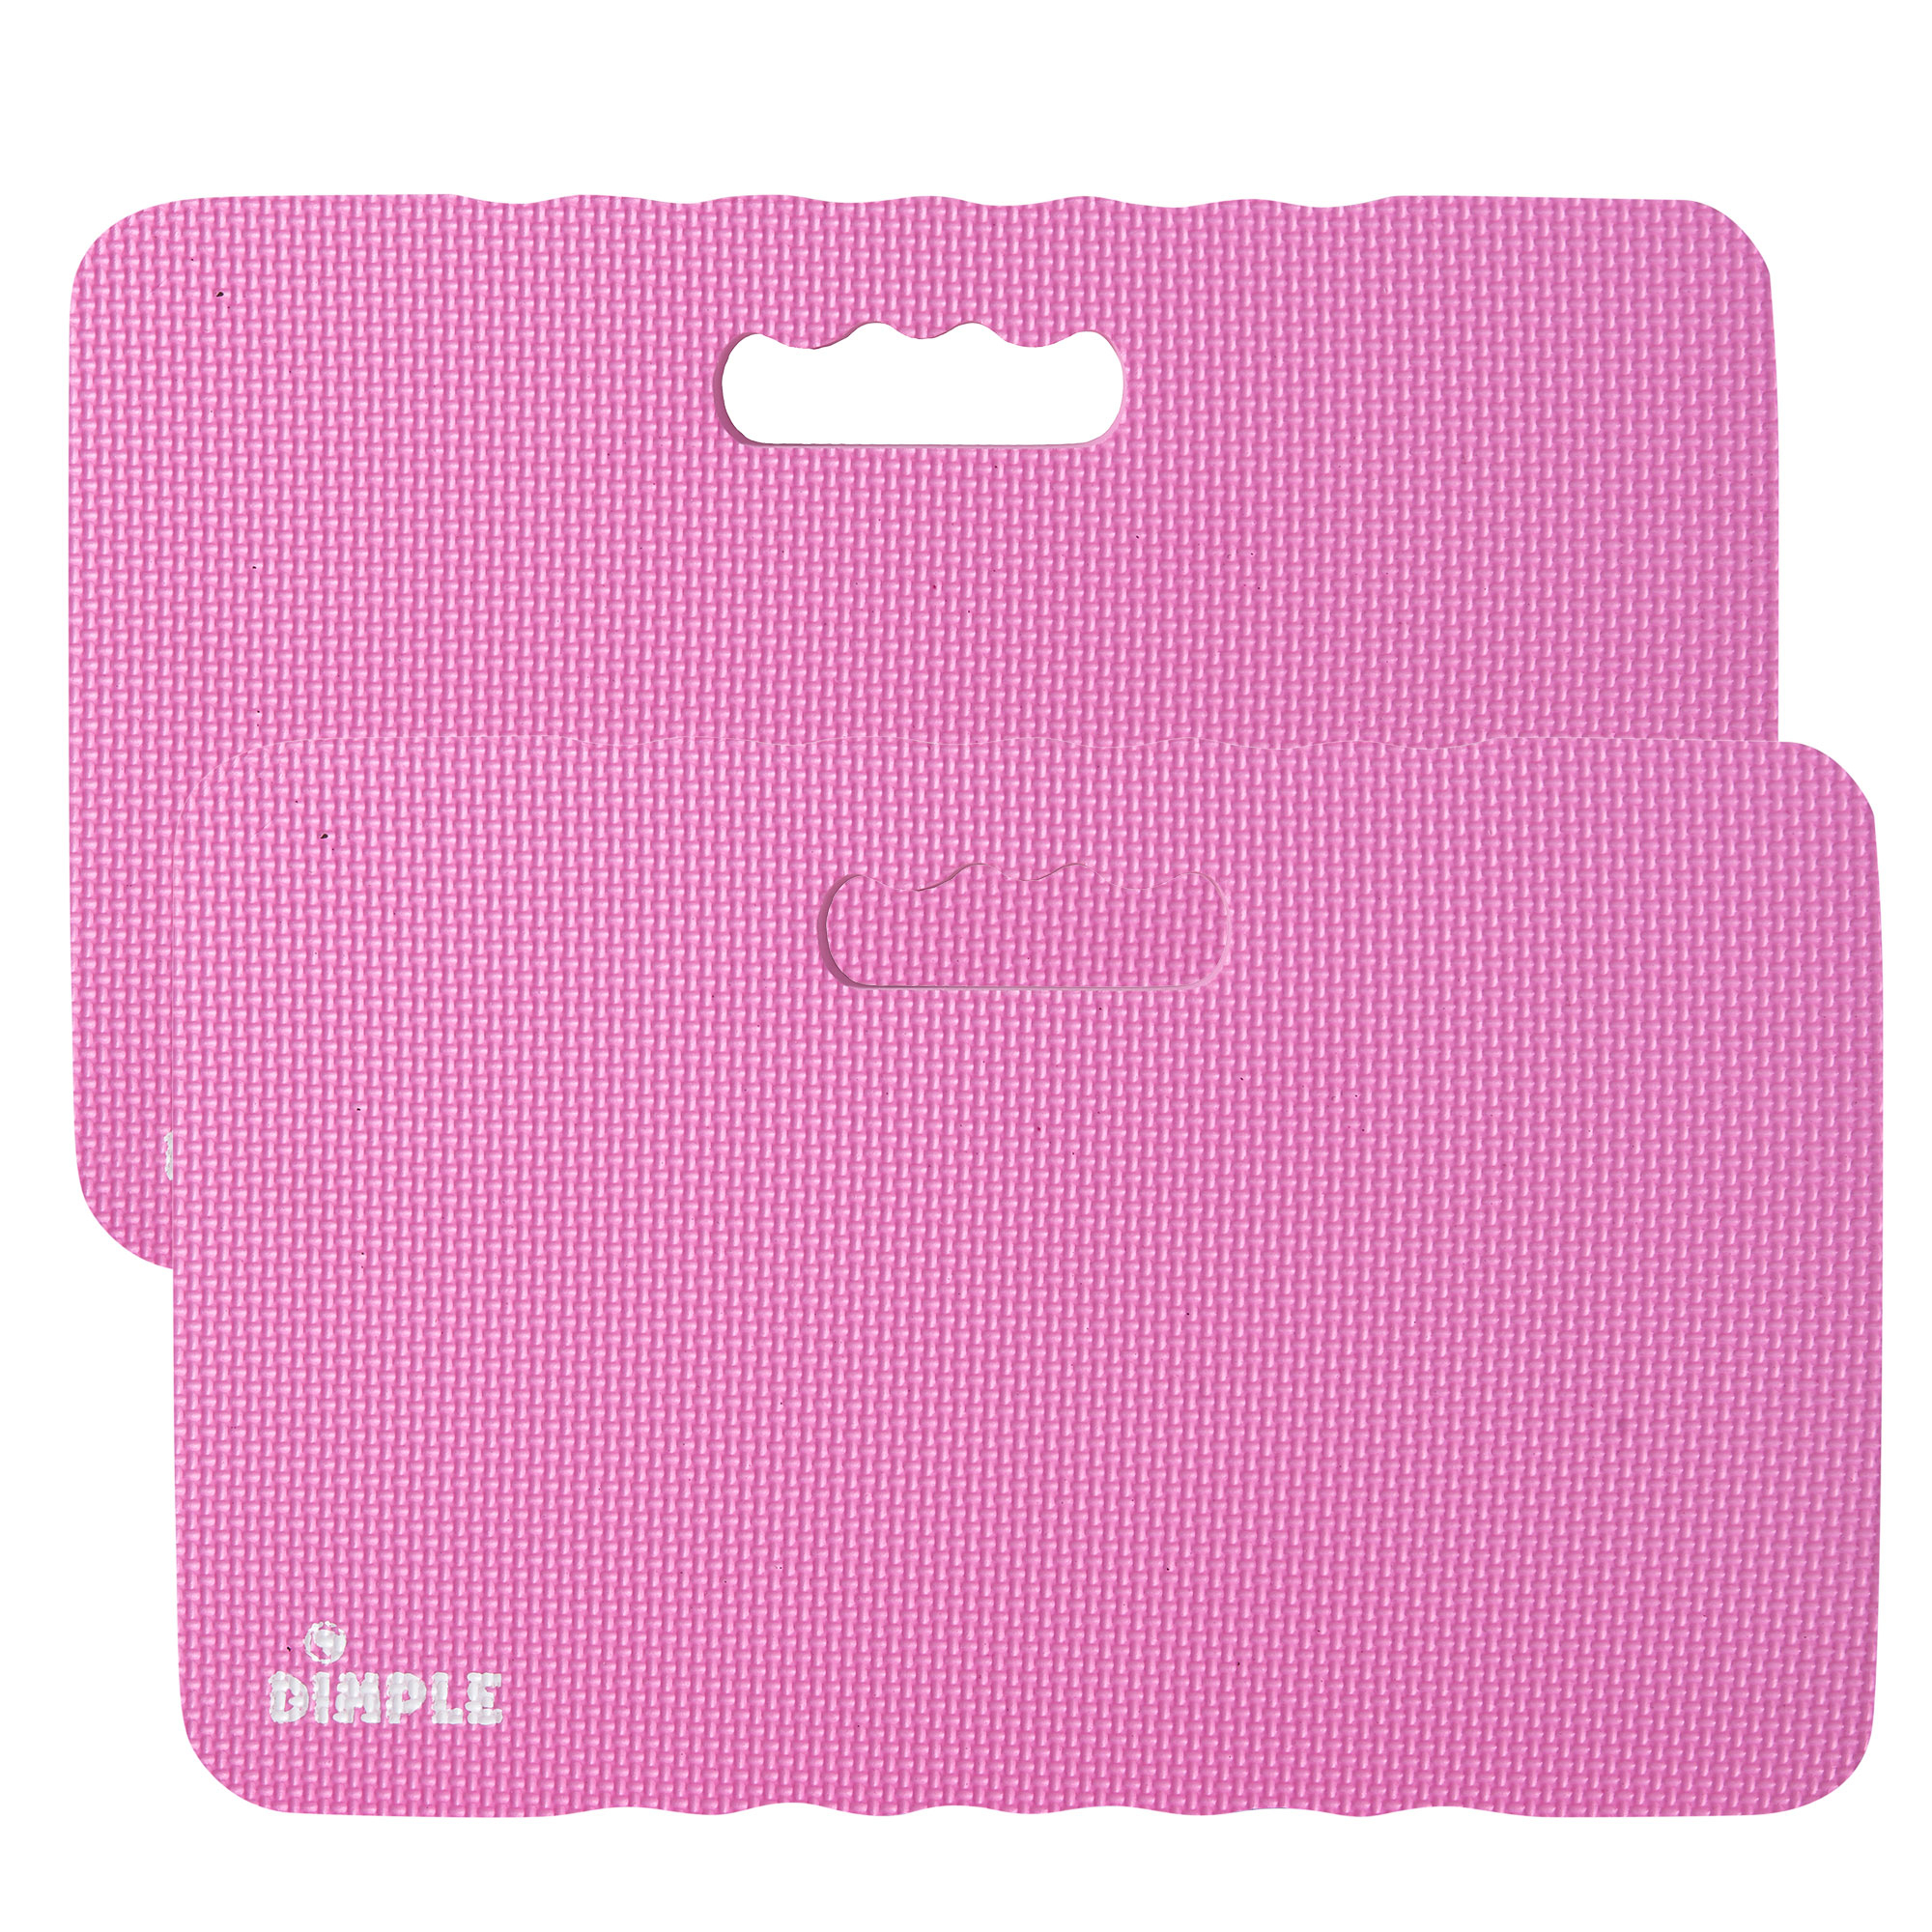 Dimple (Qty 2) High Density 1.5 Thick Foam Comfort Kneeling Pad Mats For Gardening Knee Support, Exercise, Yoga Mat, Garden Cushions (Pink)